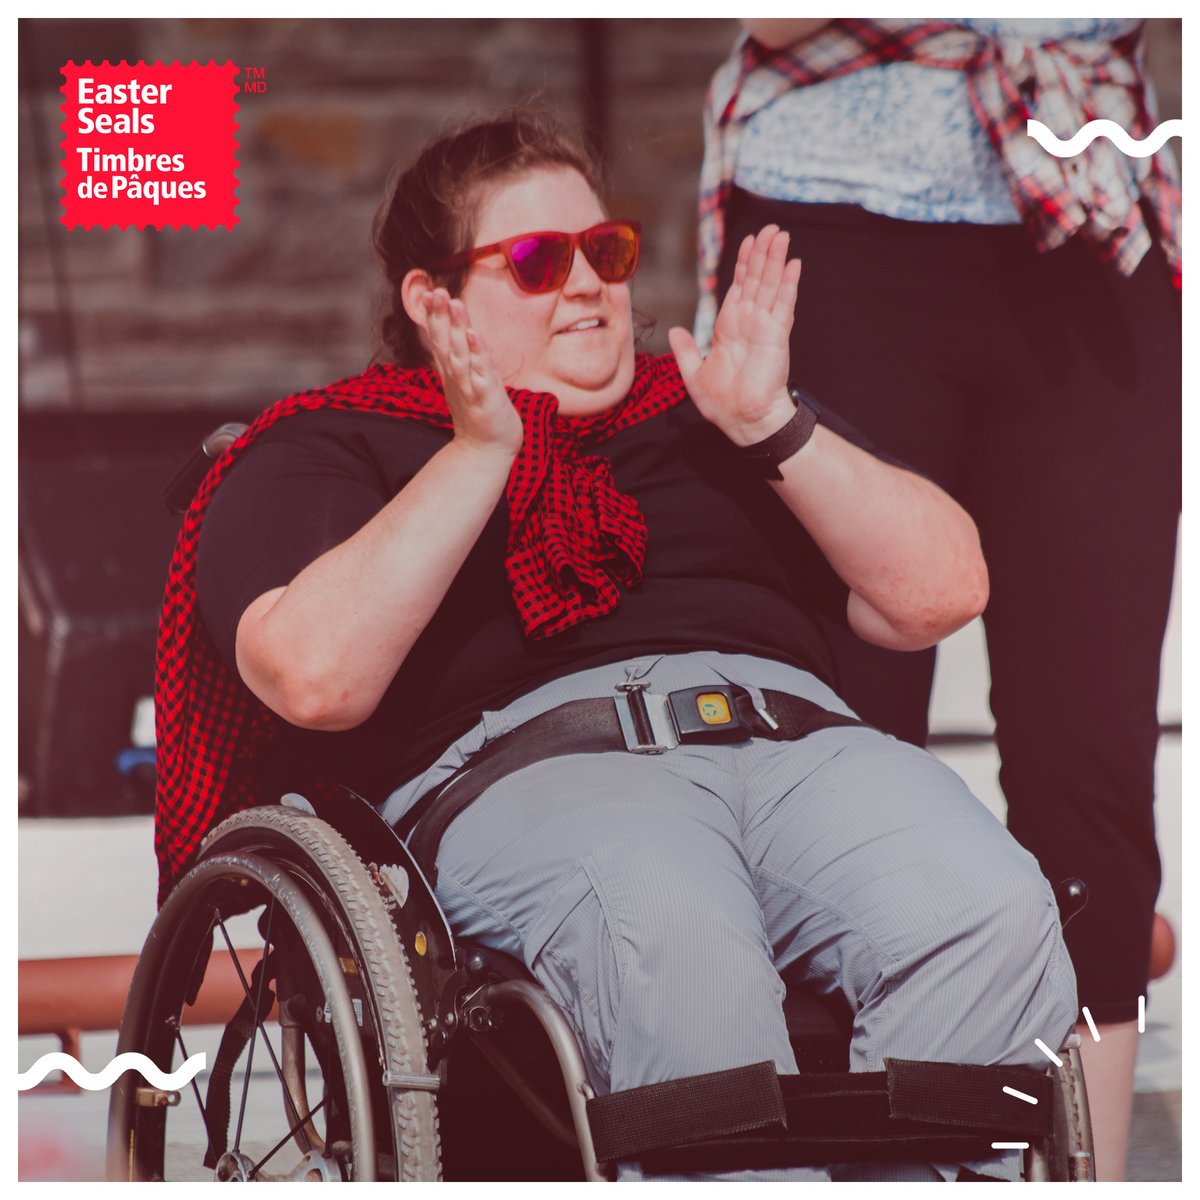 Together with our provincial and territorial partners, we serve over 150,000 Canadians living with a disability. For over 100 years we have been proud to be the trusted partner and largest provider of programs and services for Canadians living with a disability.